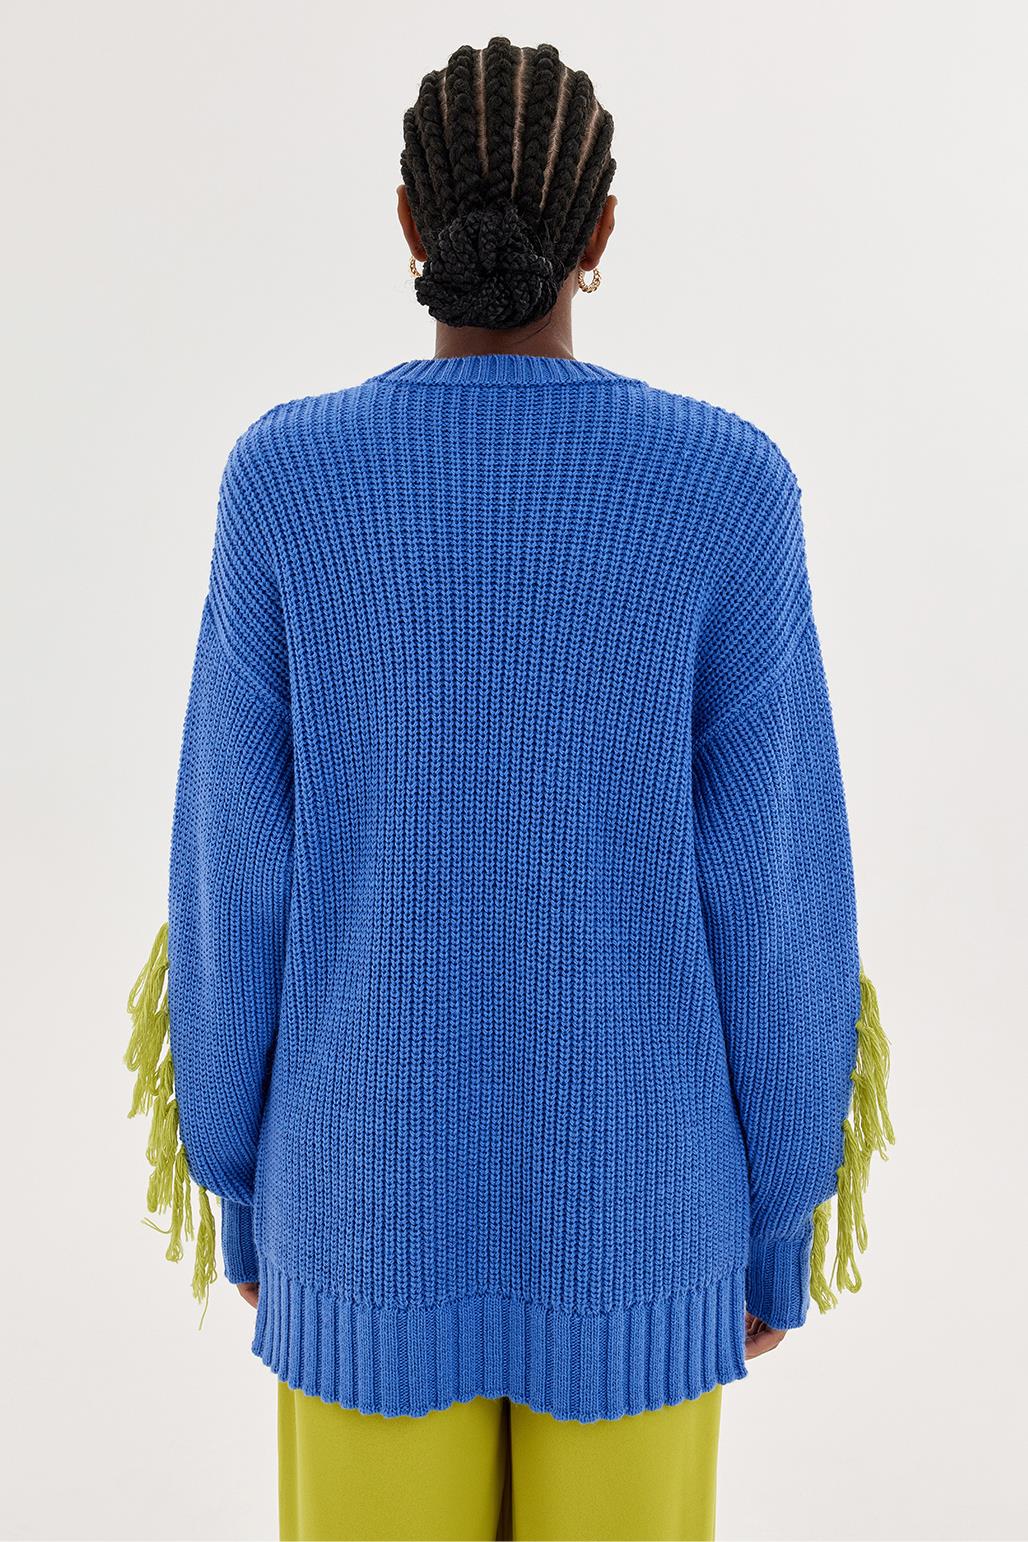 Knit Sweater With Tassels Blue